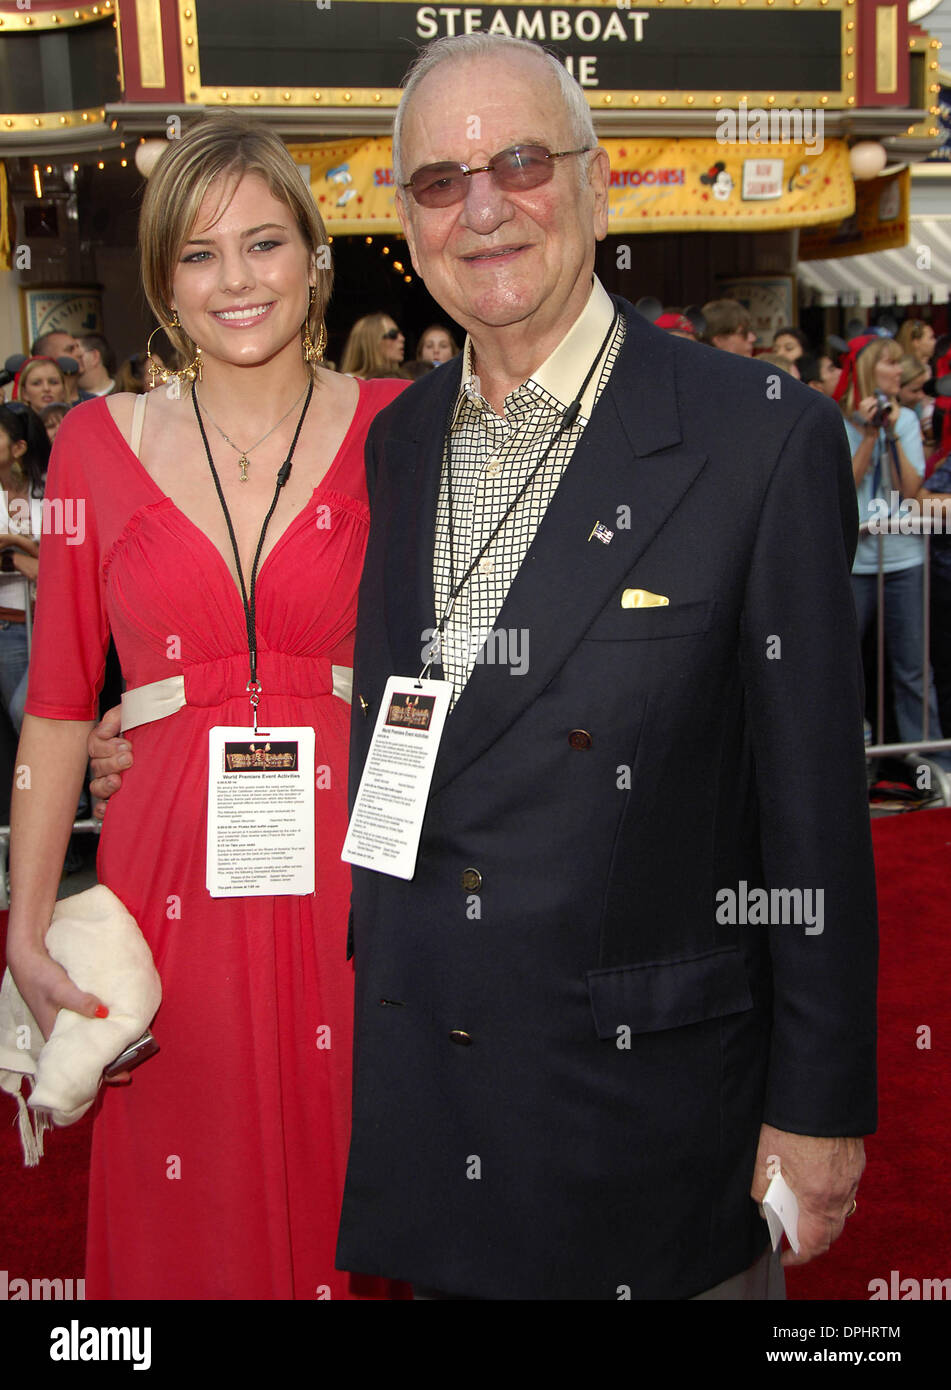 June 24, 2006 - Hollywood, California, U.S. - ANAHEIM, CA JUNE 24, 2006 (SSI) - -.Automaker executive Lee Iacocca and his guest during the premiere of the new movie from Walt Disney Pictures' PIRATES OF THE CARIBBEAN: DEAD MAN'S CHEST, held at Disneyland, on June 24, 2006, in Anaheim, California.  s.K48436MG.  -  PHOTOS(Credit Image: © Michael Germana/Globe Photos/ZUMAPRESS.com) Stock Photo